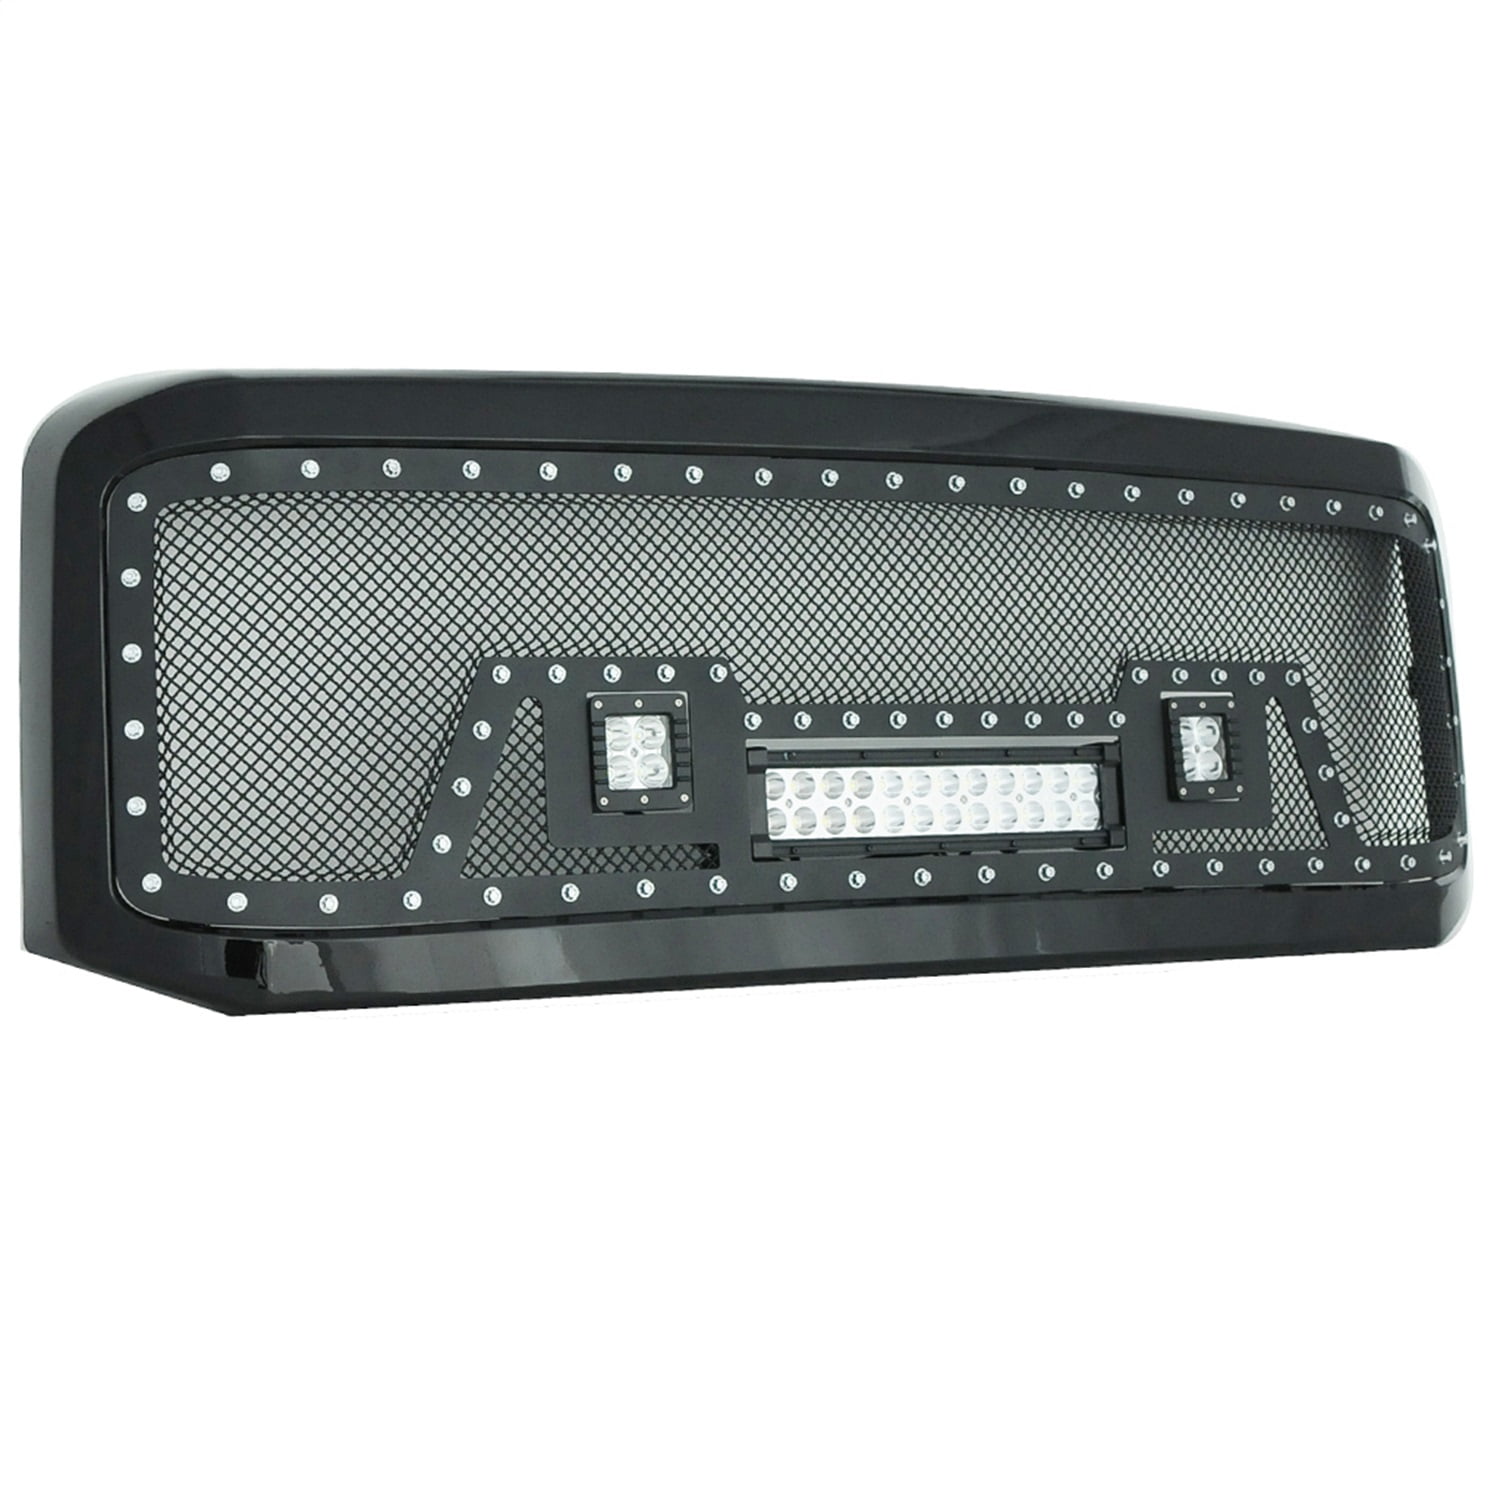 Paramount Restyling 460228 Grille